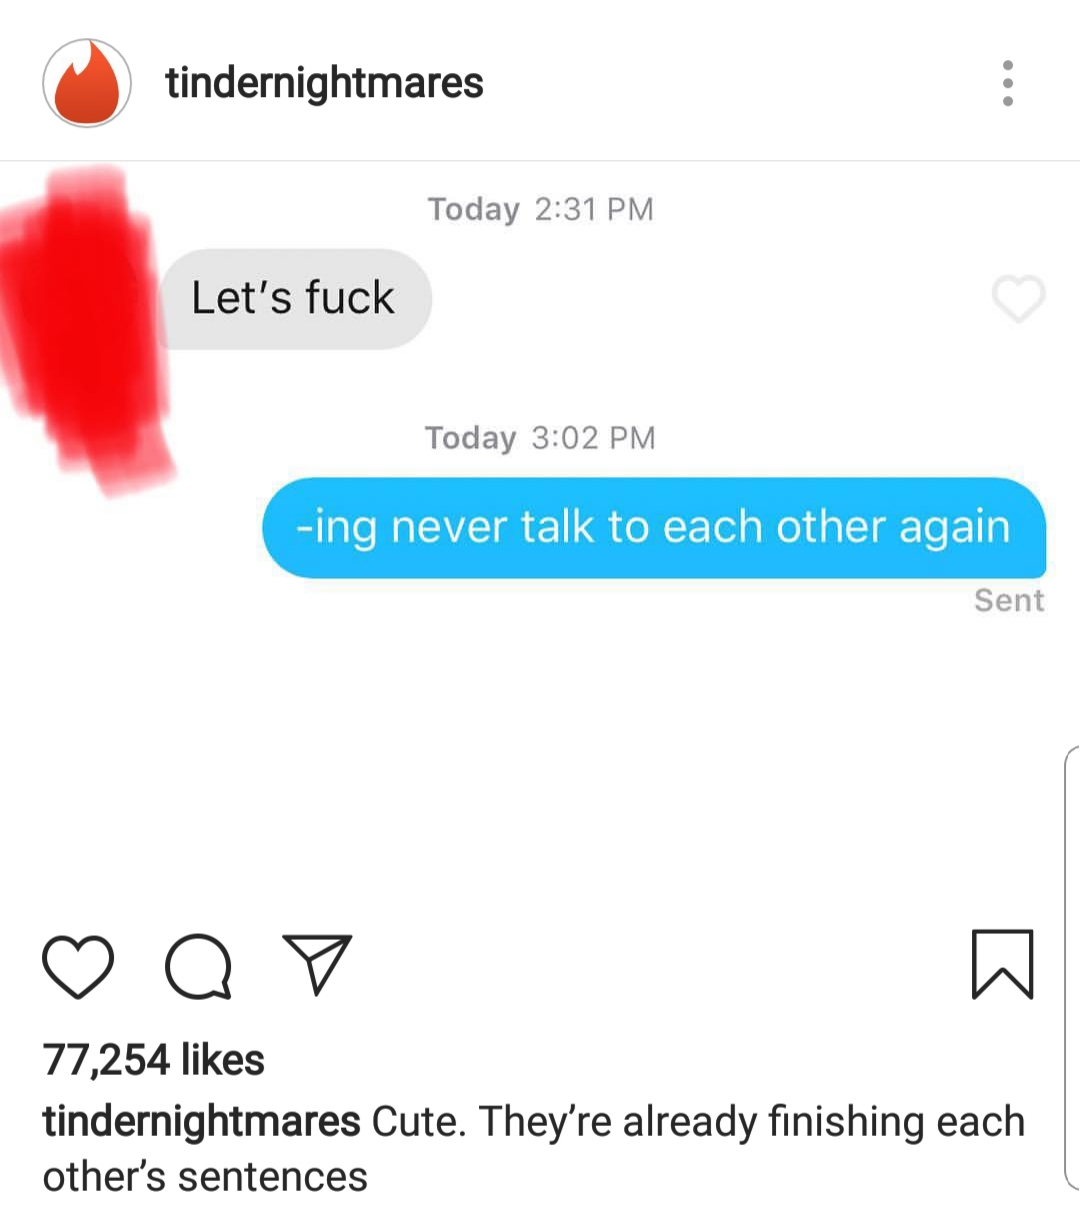 memes - online advertising - tindernightmares Today Let's fuck Today ing never talk to each other again Sent Op 77,254 tindernightmares Cute. They're already finishing each other's sentences